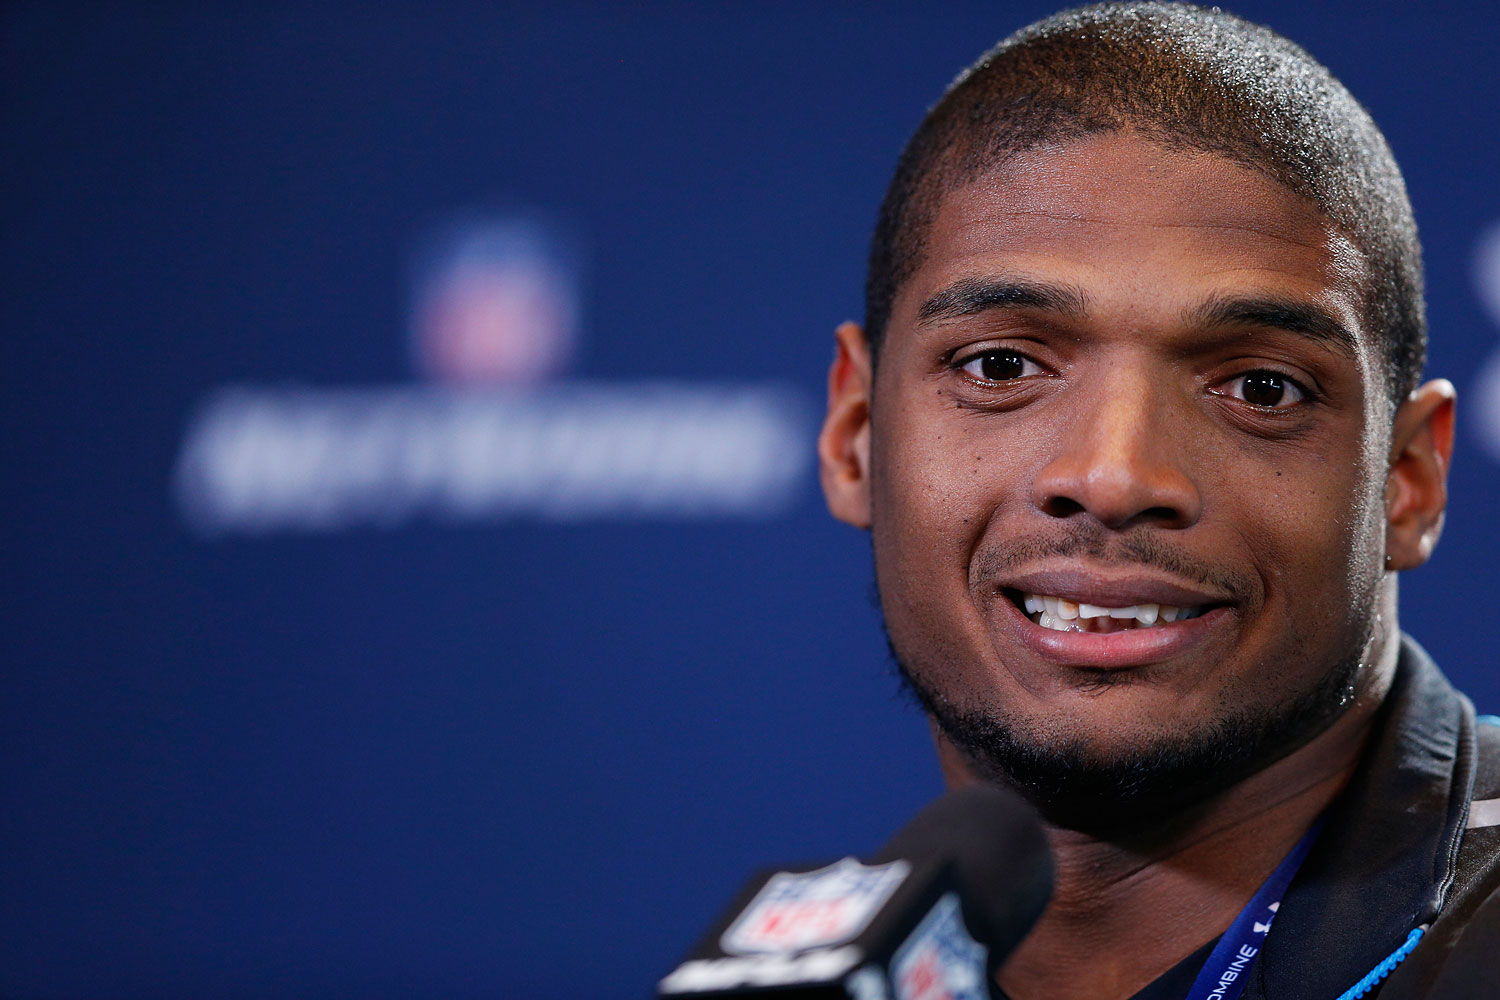 Michael Sam has been drafted by The St. Louis Rams to become the first openly gay player in the NFL. (Joe Robbins—Getty Images)